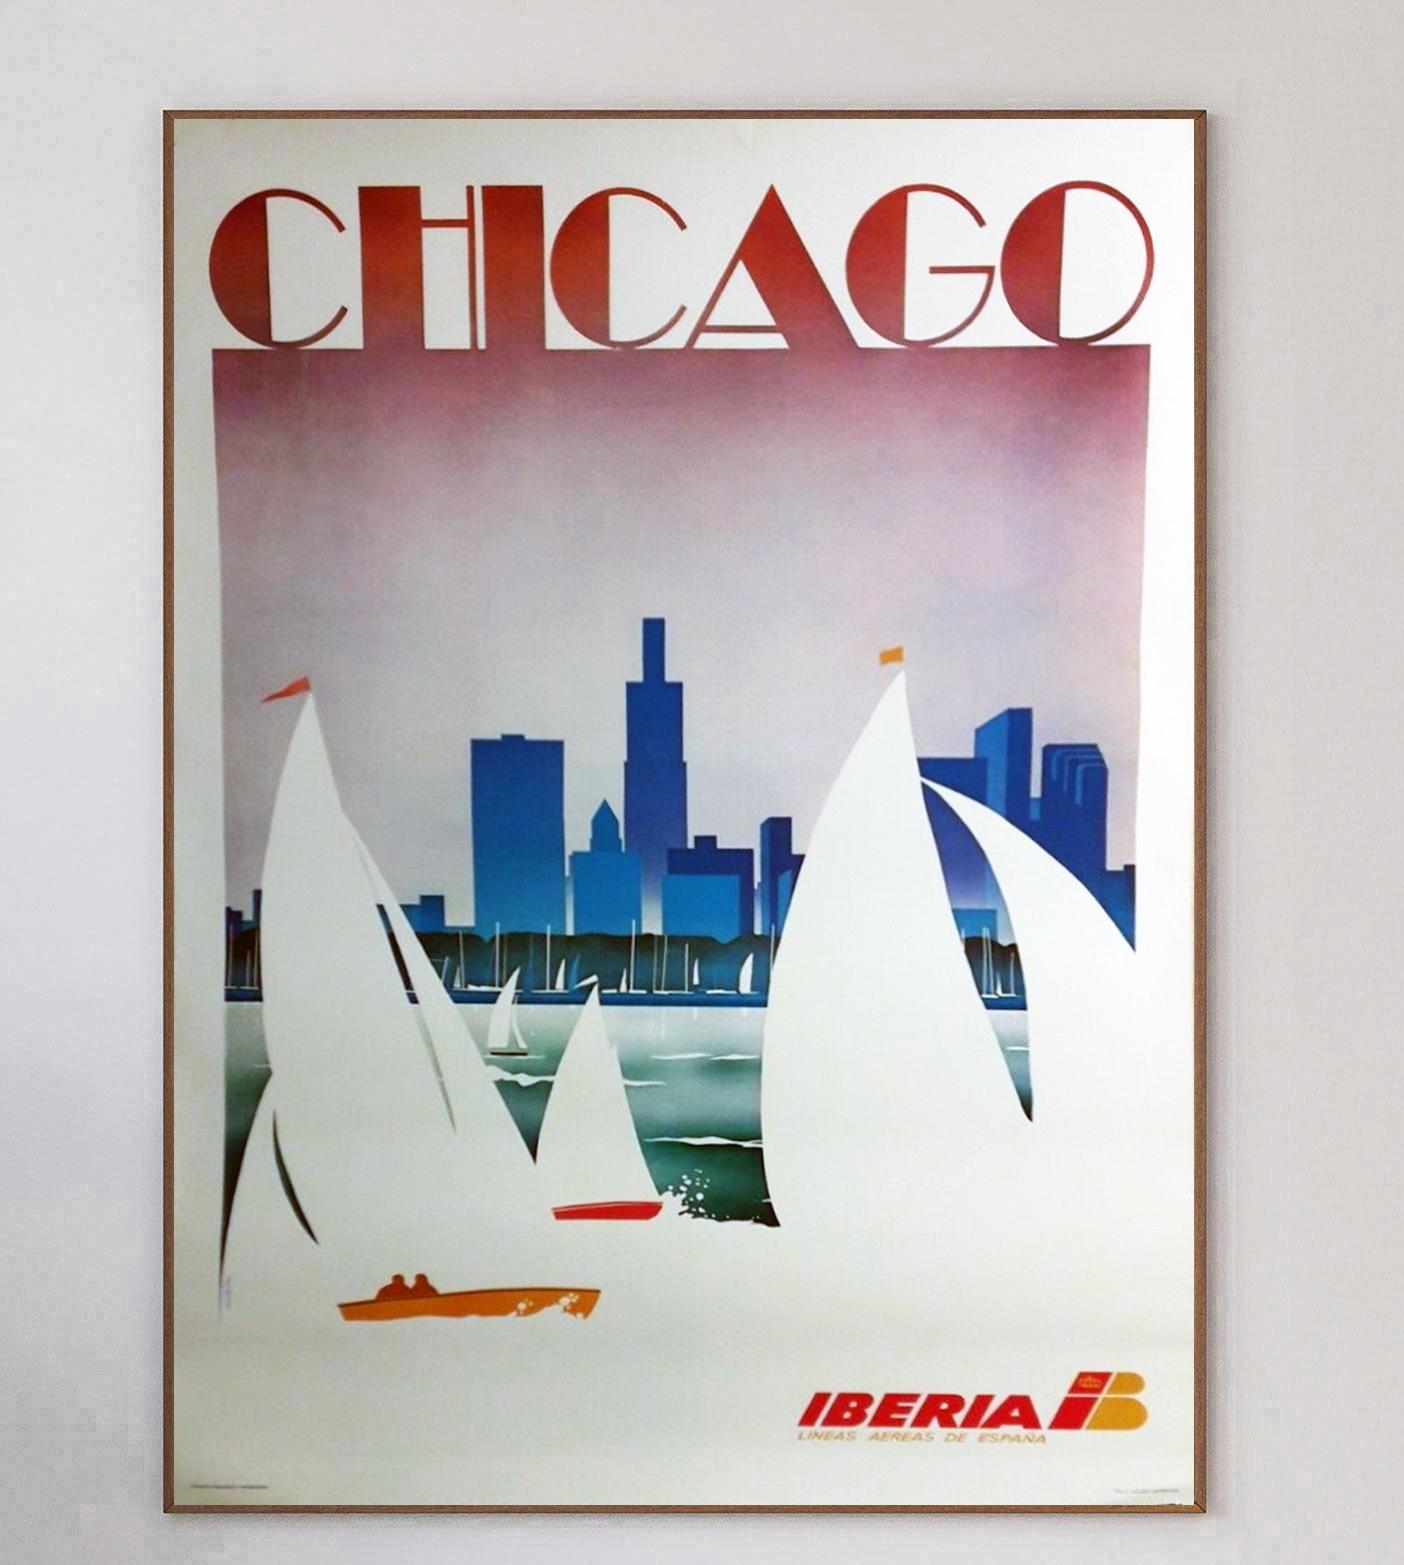 Beautiful poster from 1987 promoting Iberia airlines routes to the US city of Chicago. The Spanish airline was founded in 1927 and continues strong to this day. With brilliant art deco inspired design, the poster depicts sailing boats on Lake